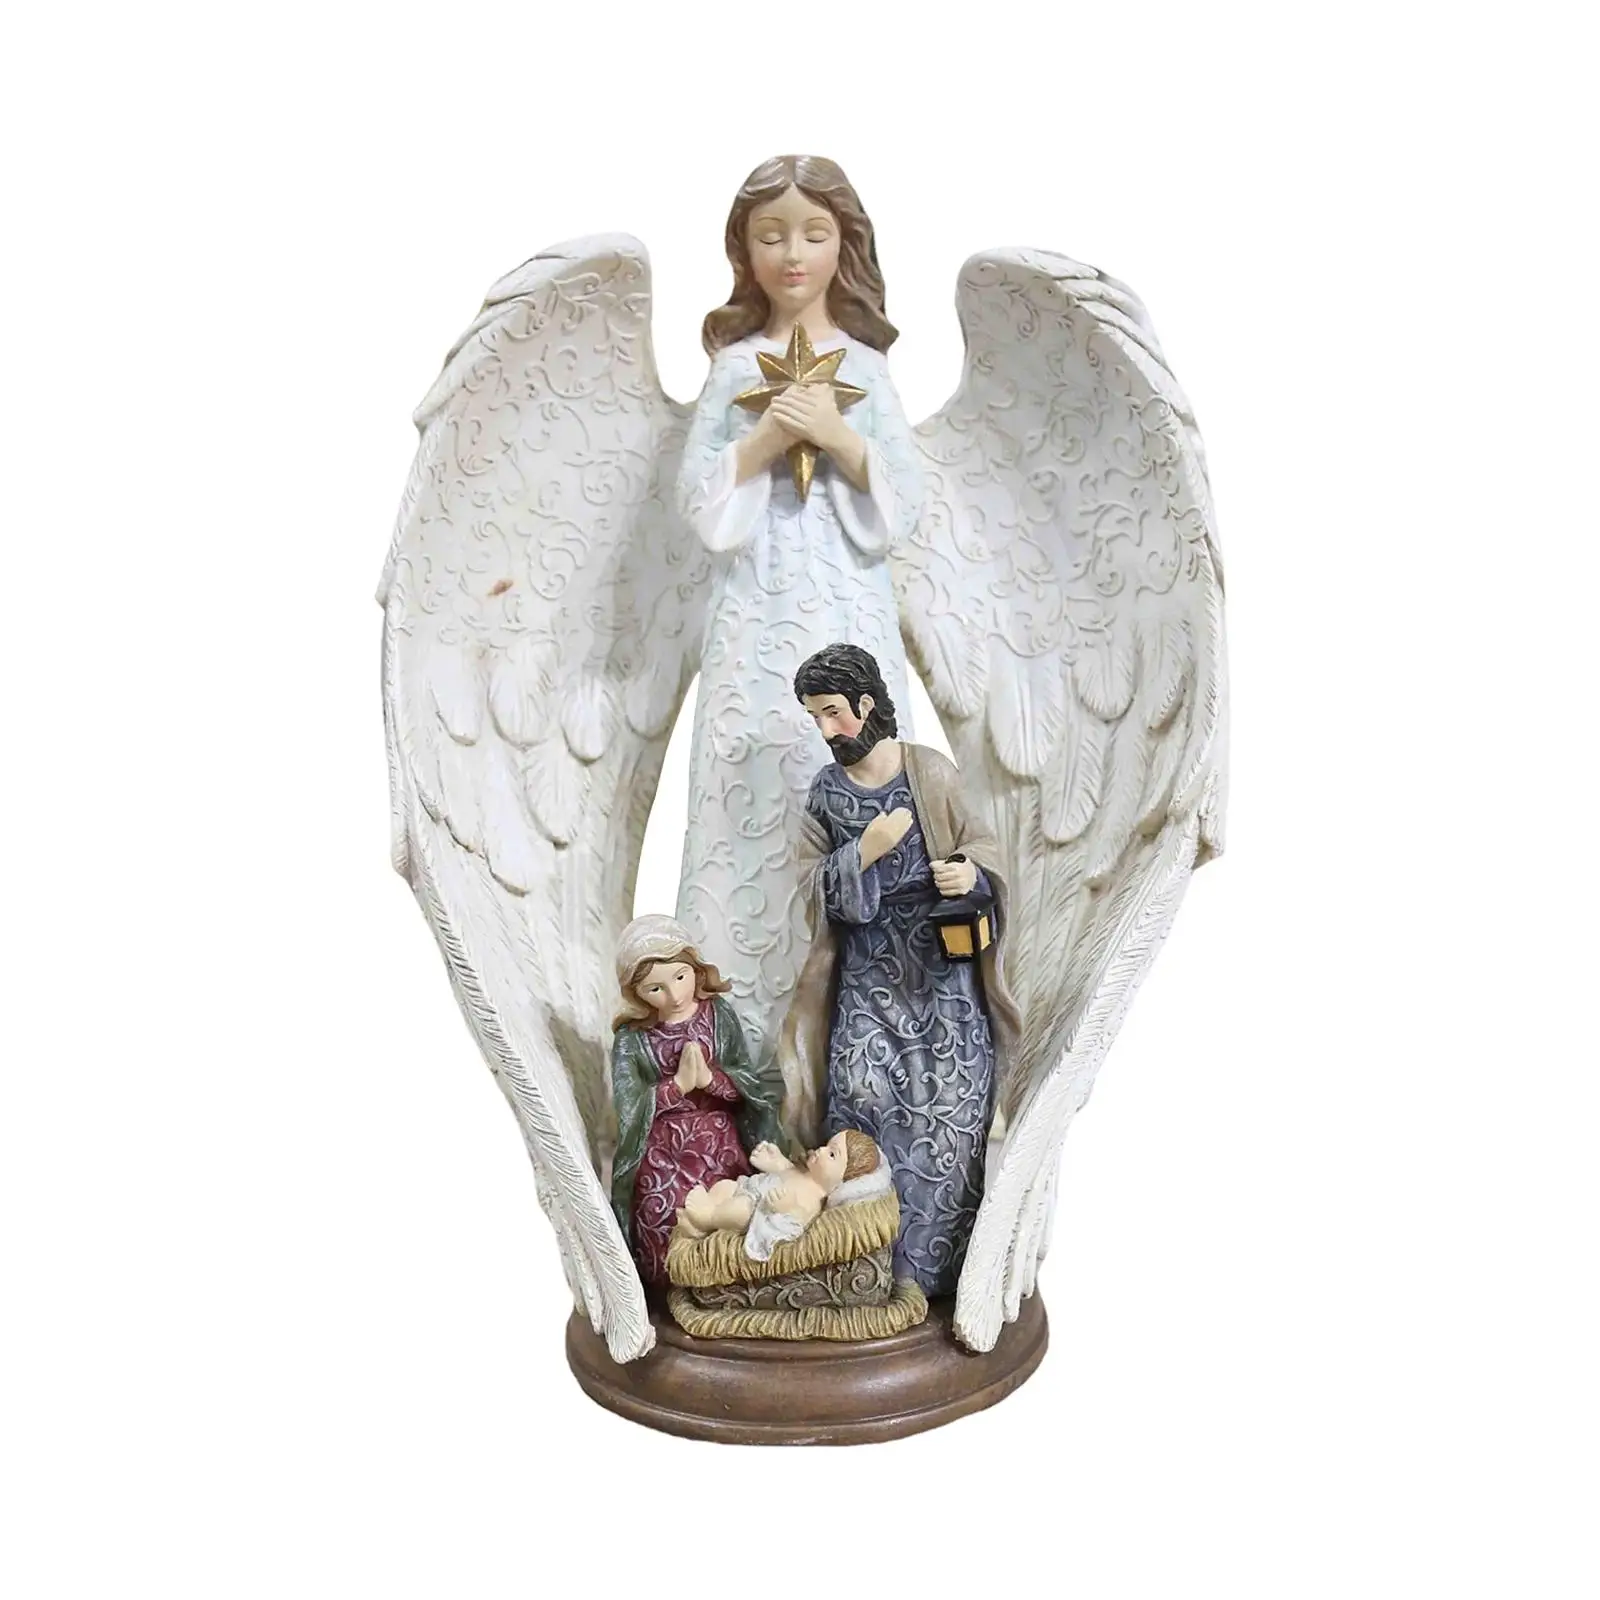 Holy Family Statue Resin Sculpture Handpainted Collection Jesus Figure Nativity